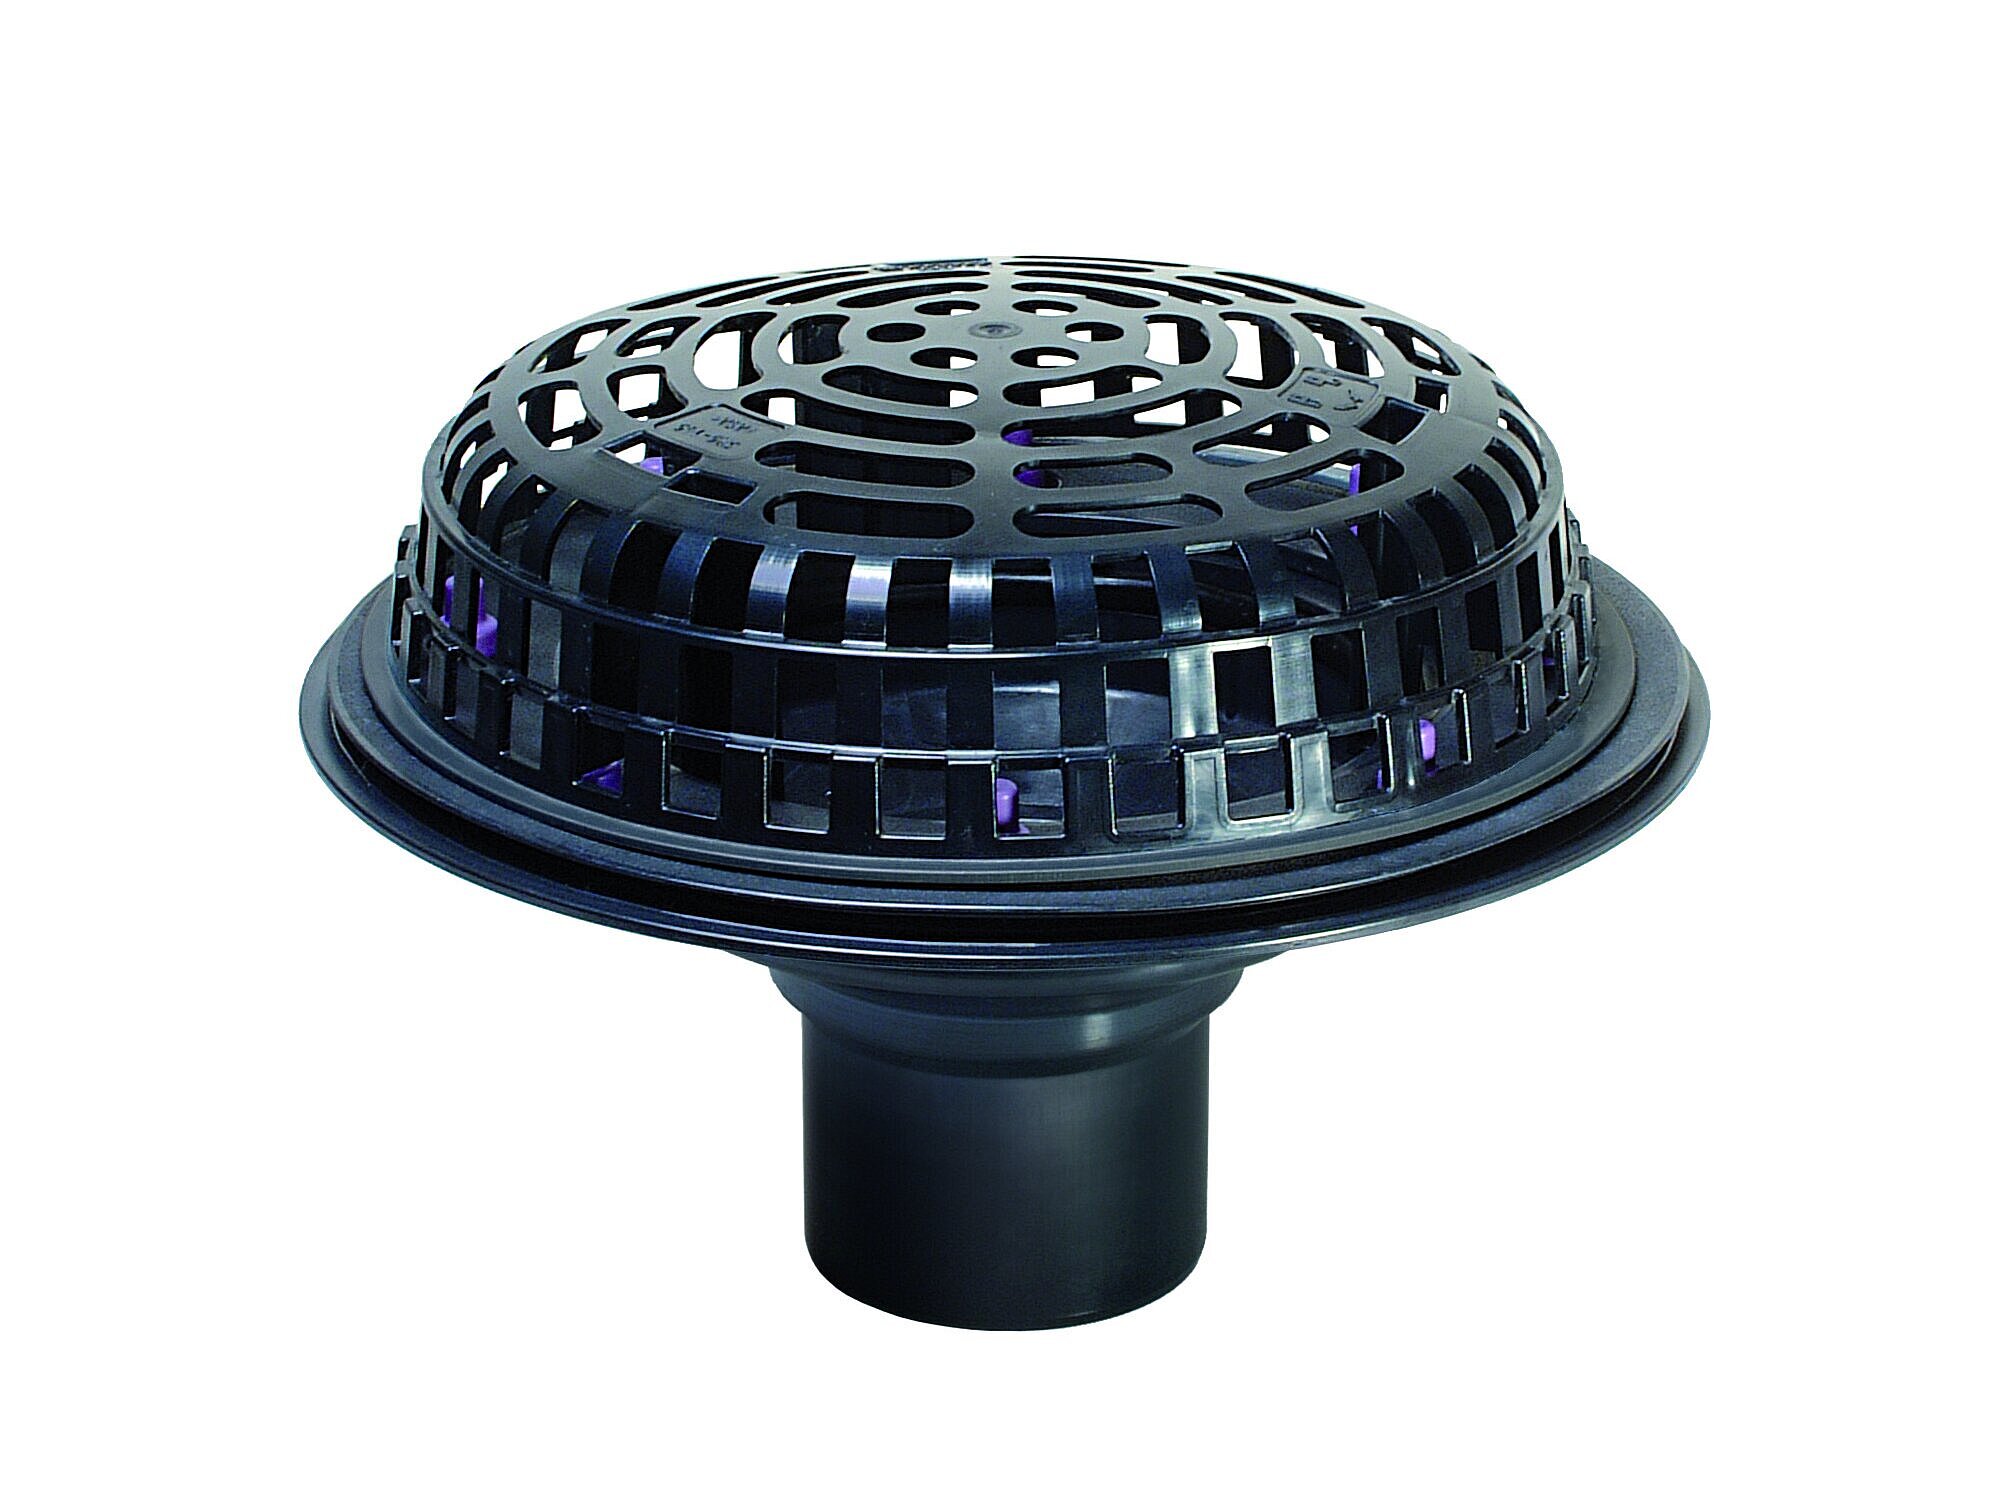 Ecoguss roof drain for flat roof surfaces available with and without heating